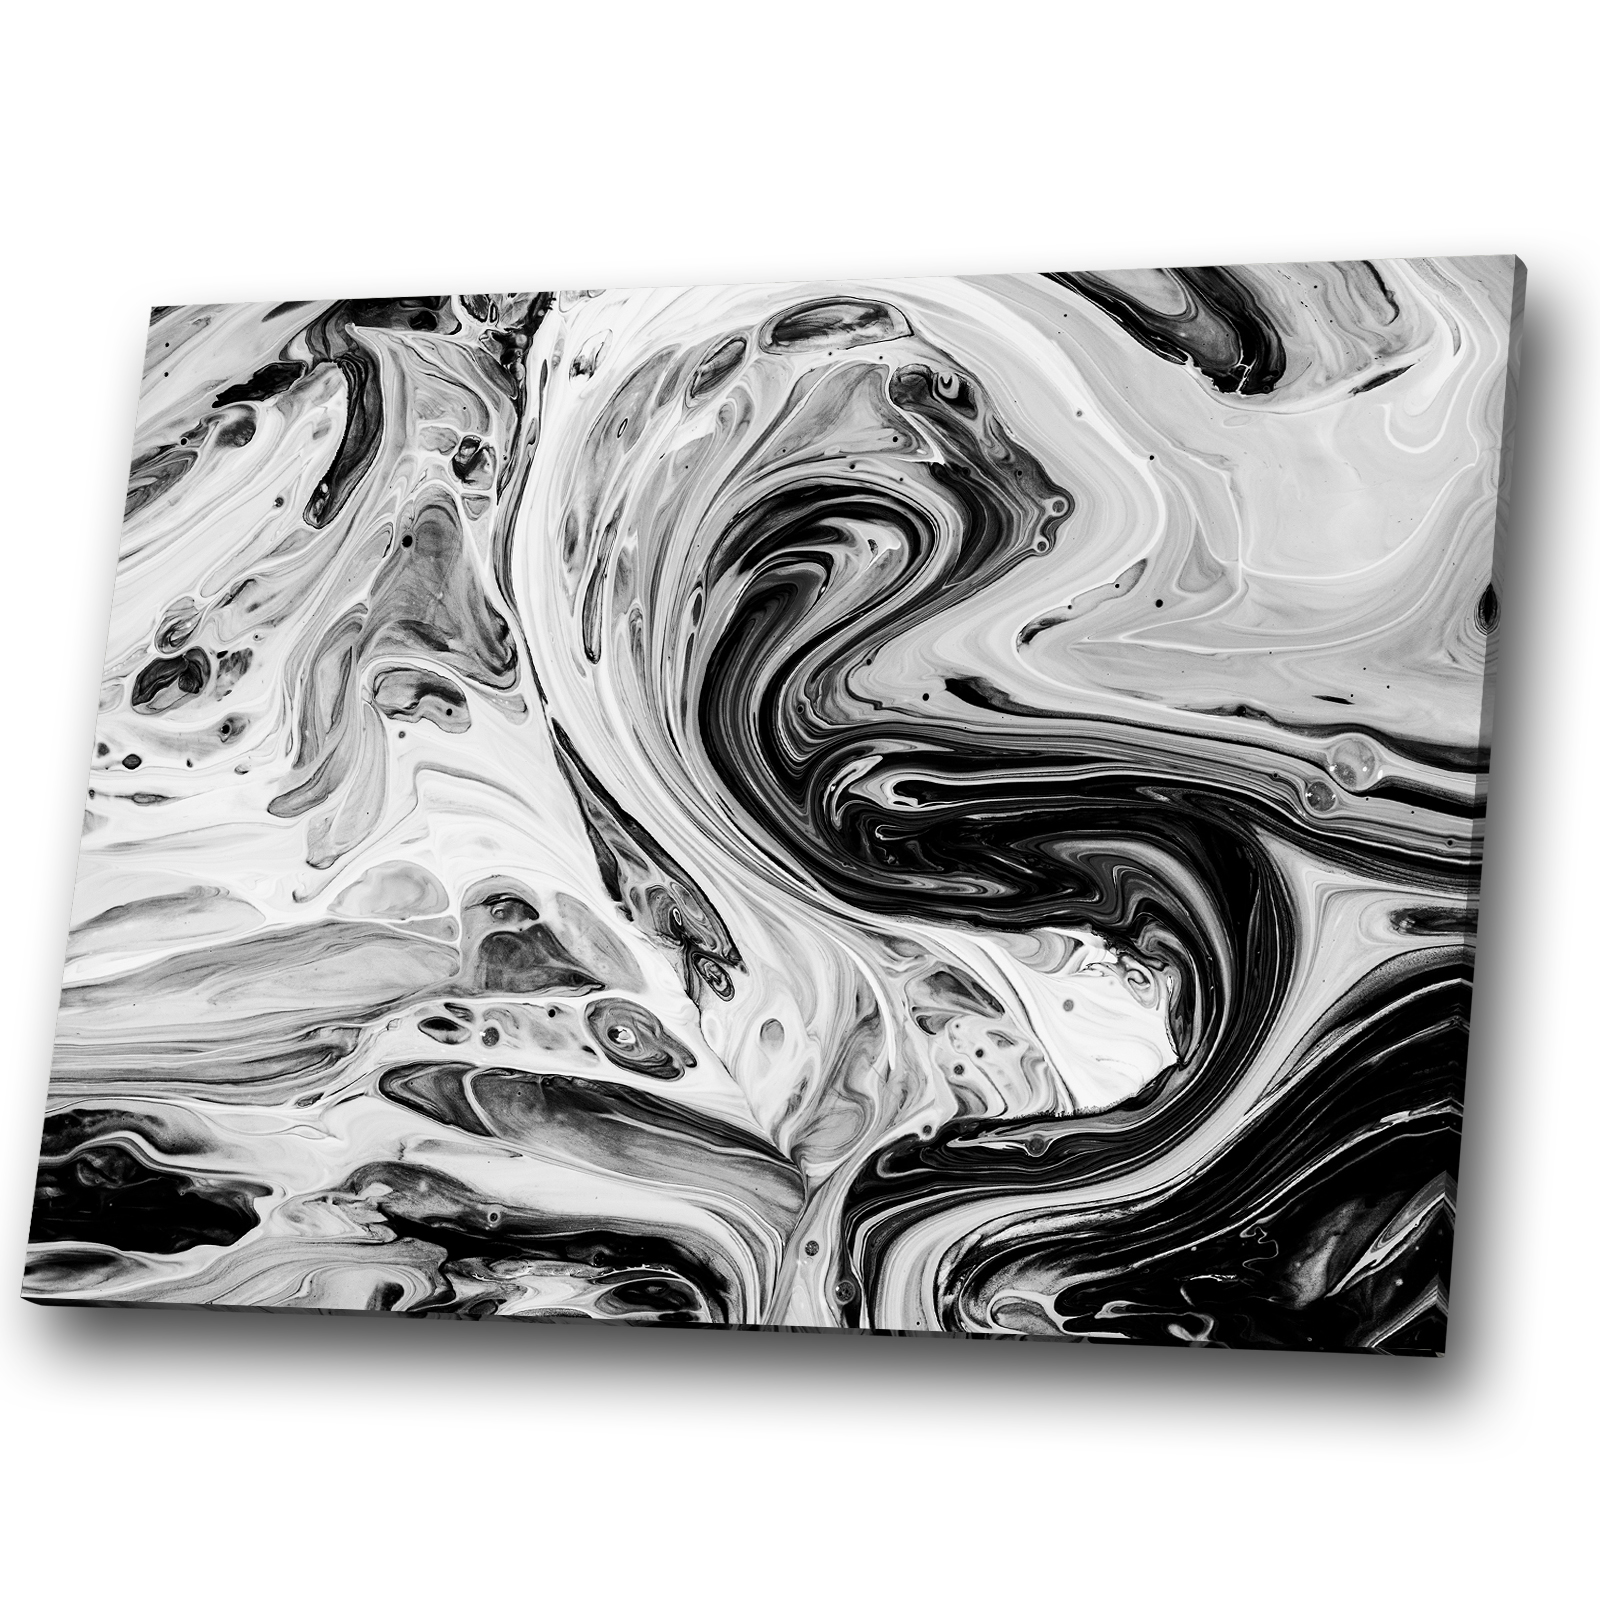 AB1098 Black white Chic Modern Abstract Canvas Wall Art Large Picture Prints 